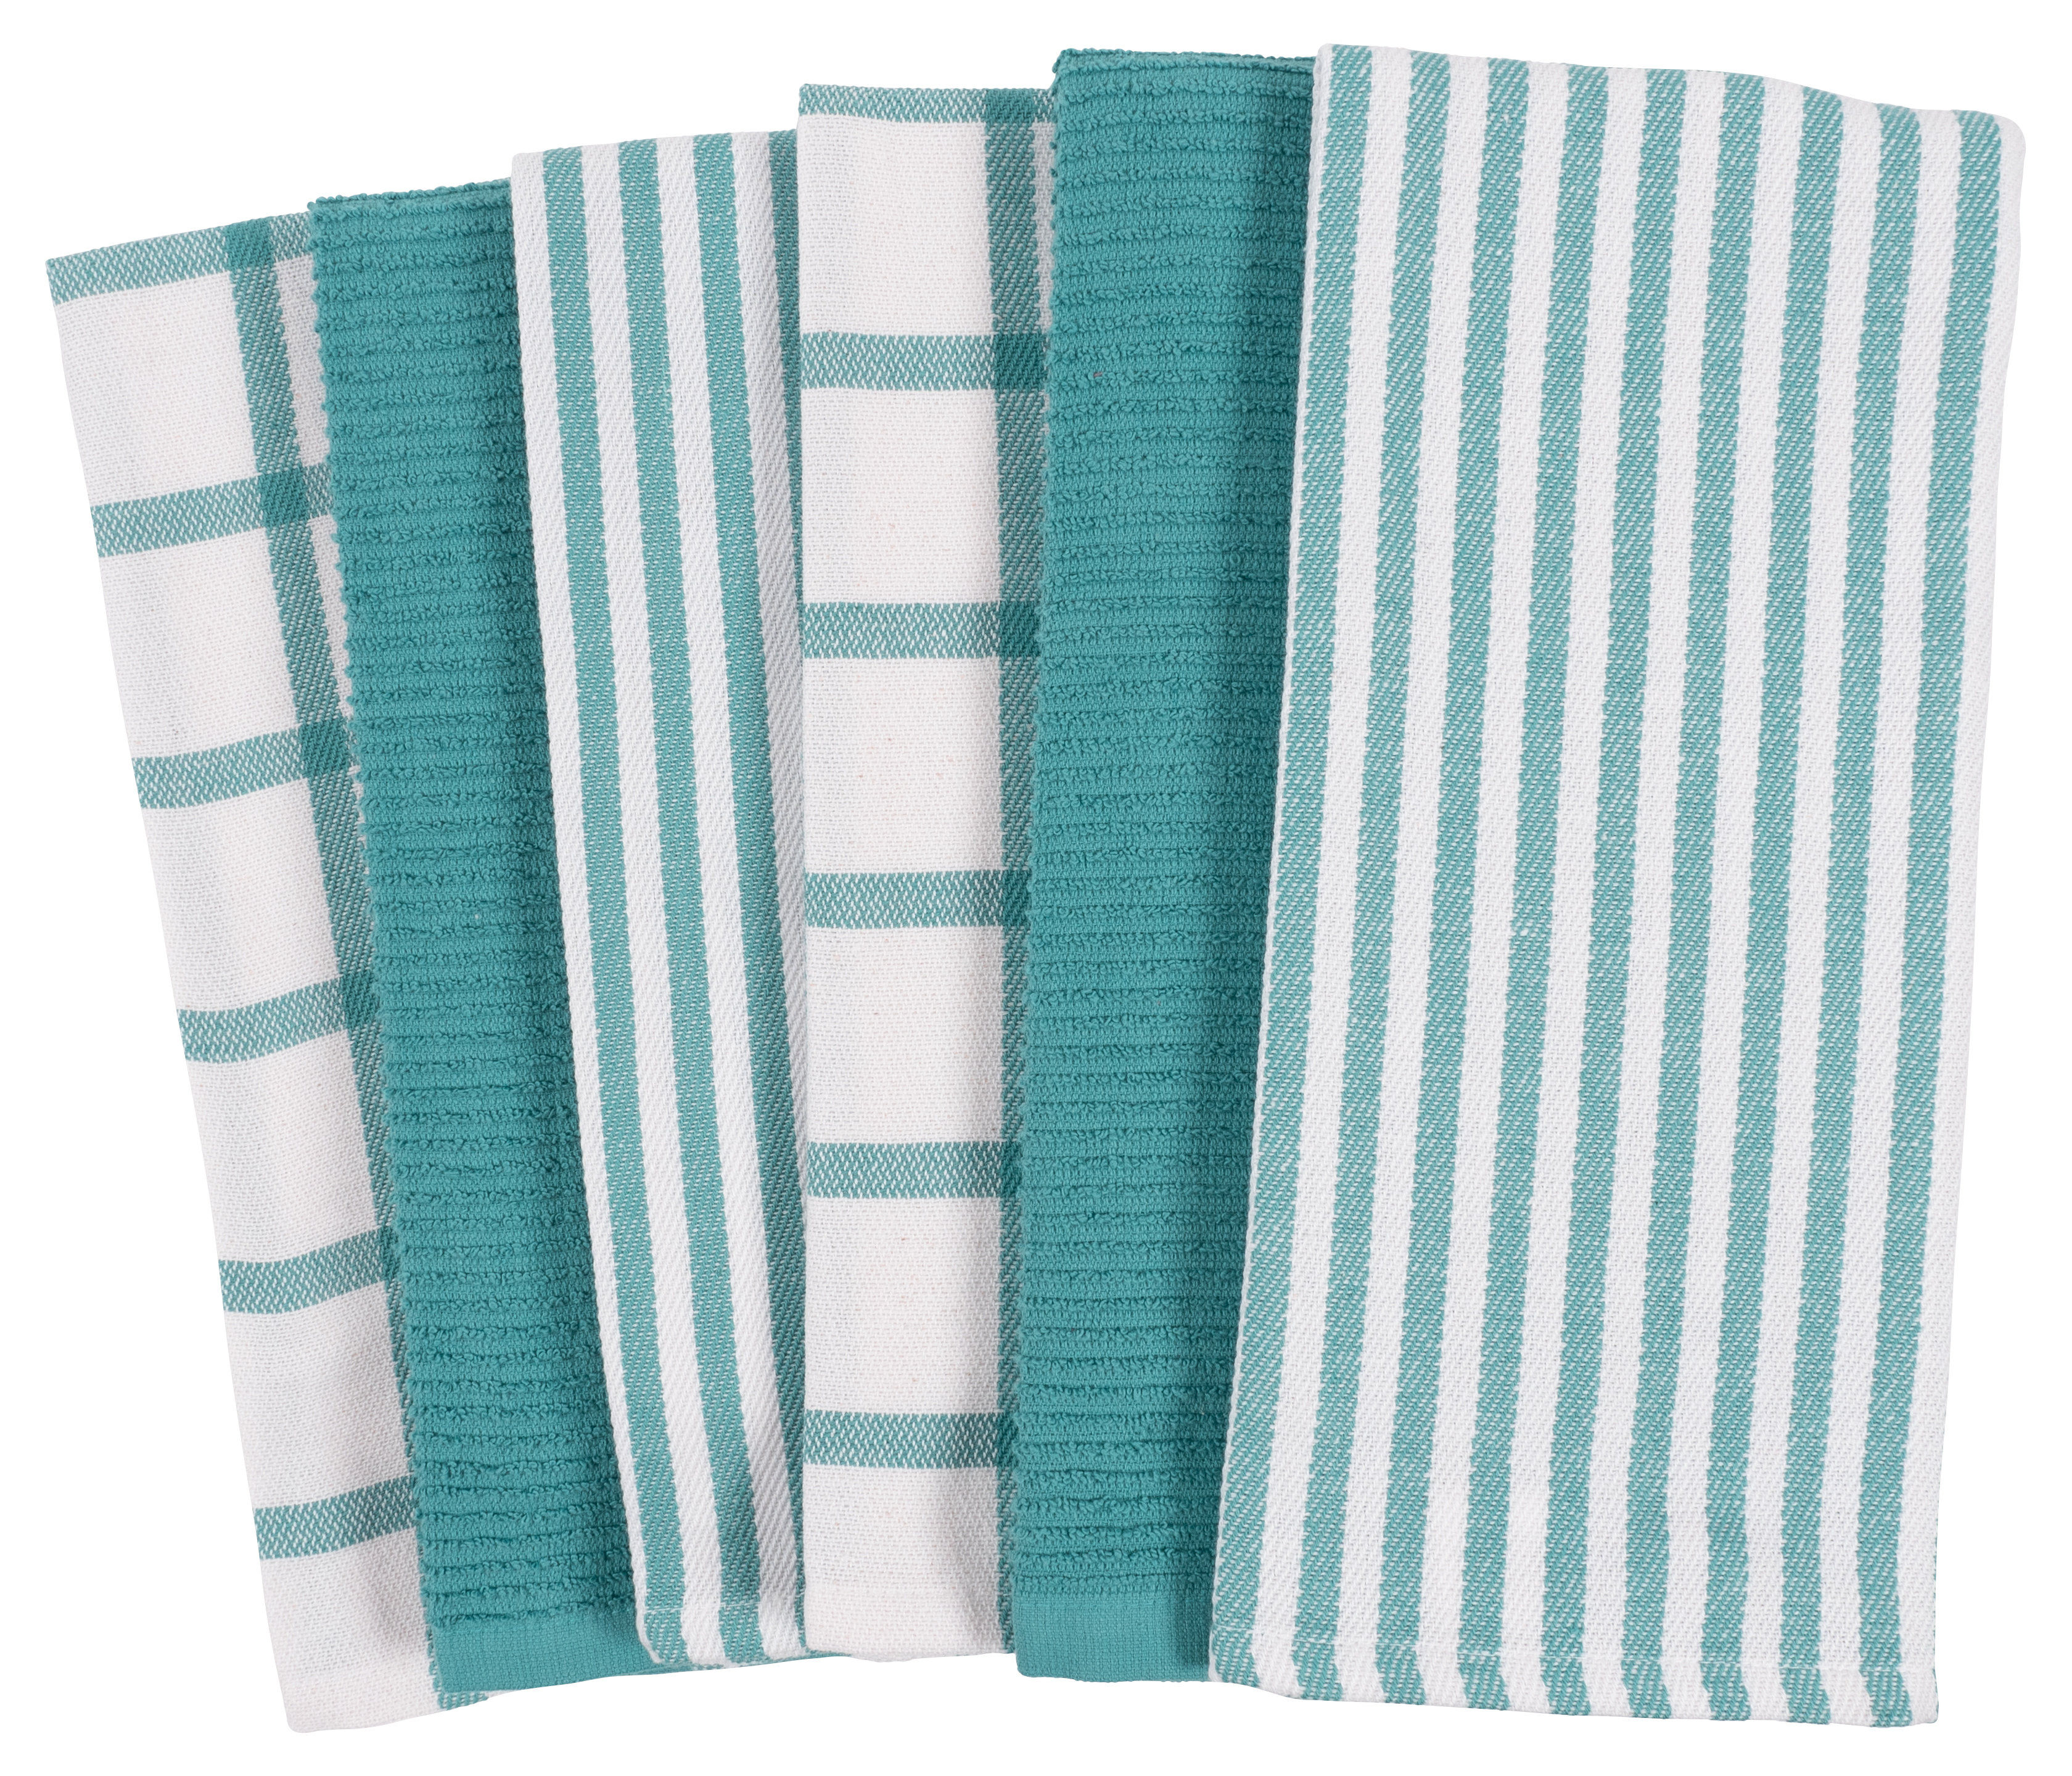 KAF Home Assorted Flat Kitchen Towels | Set of 10 Dish Towels, 100% Cotton - 18 x 28 Inches | Ultra Absorbent Soft Kitchen Tea Towels | Perfect for